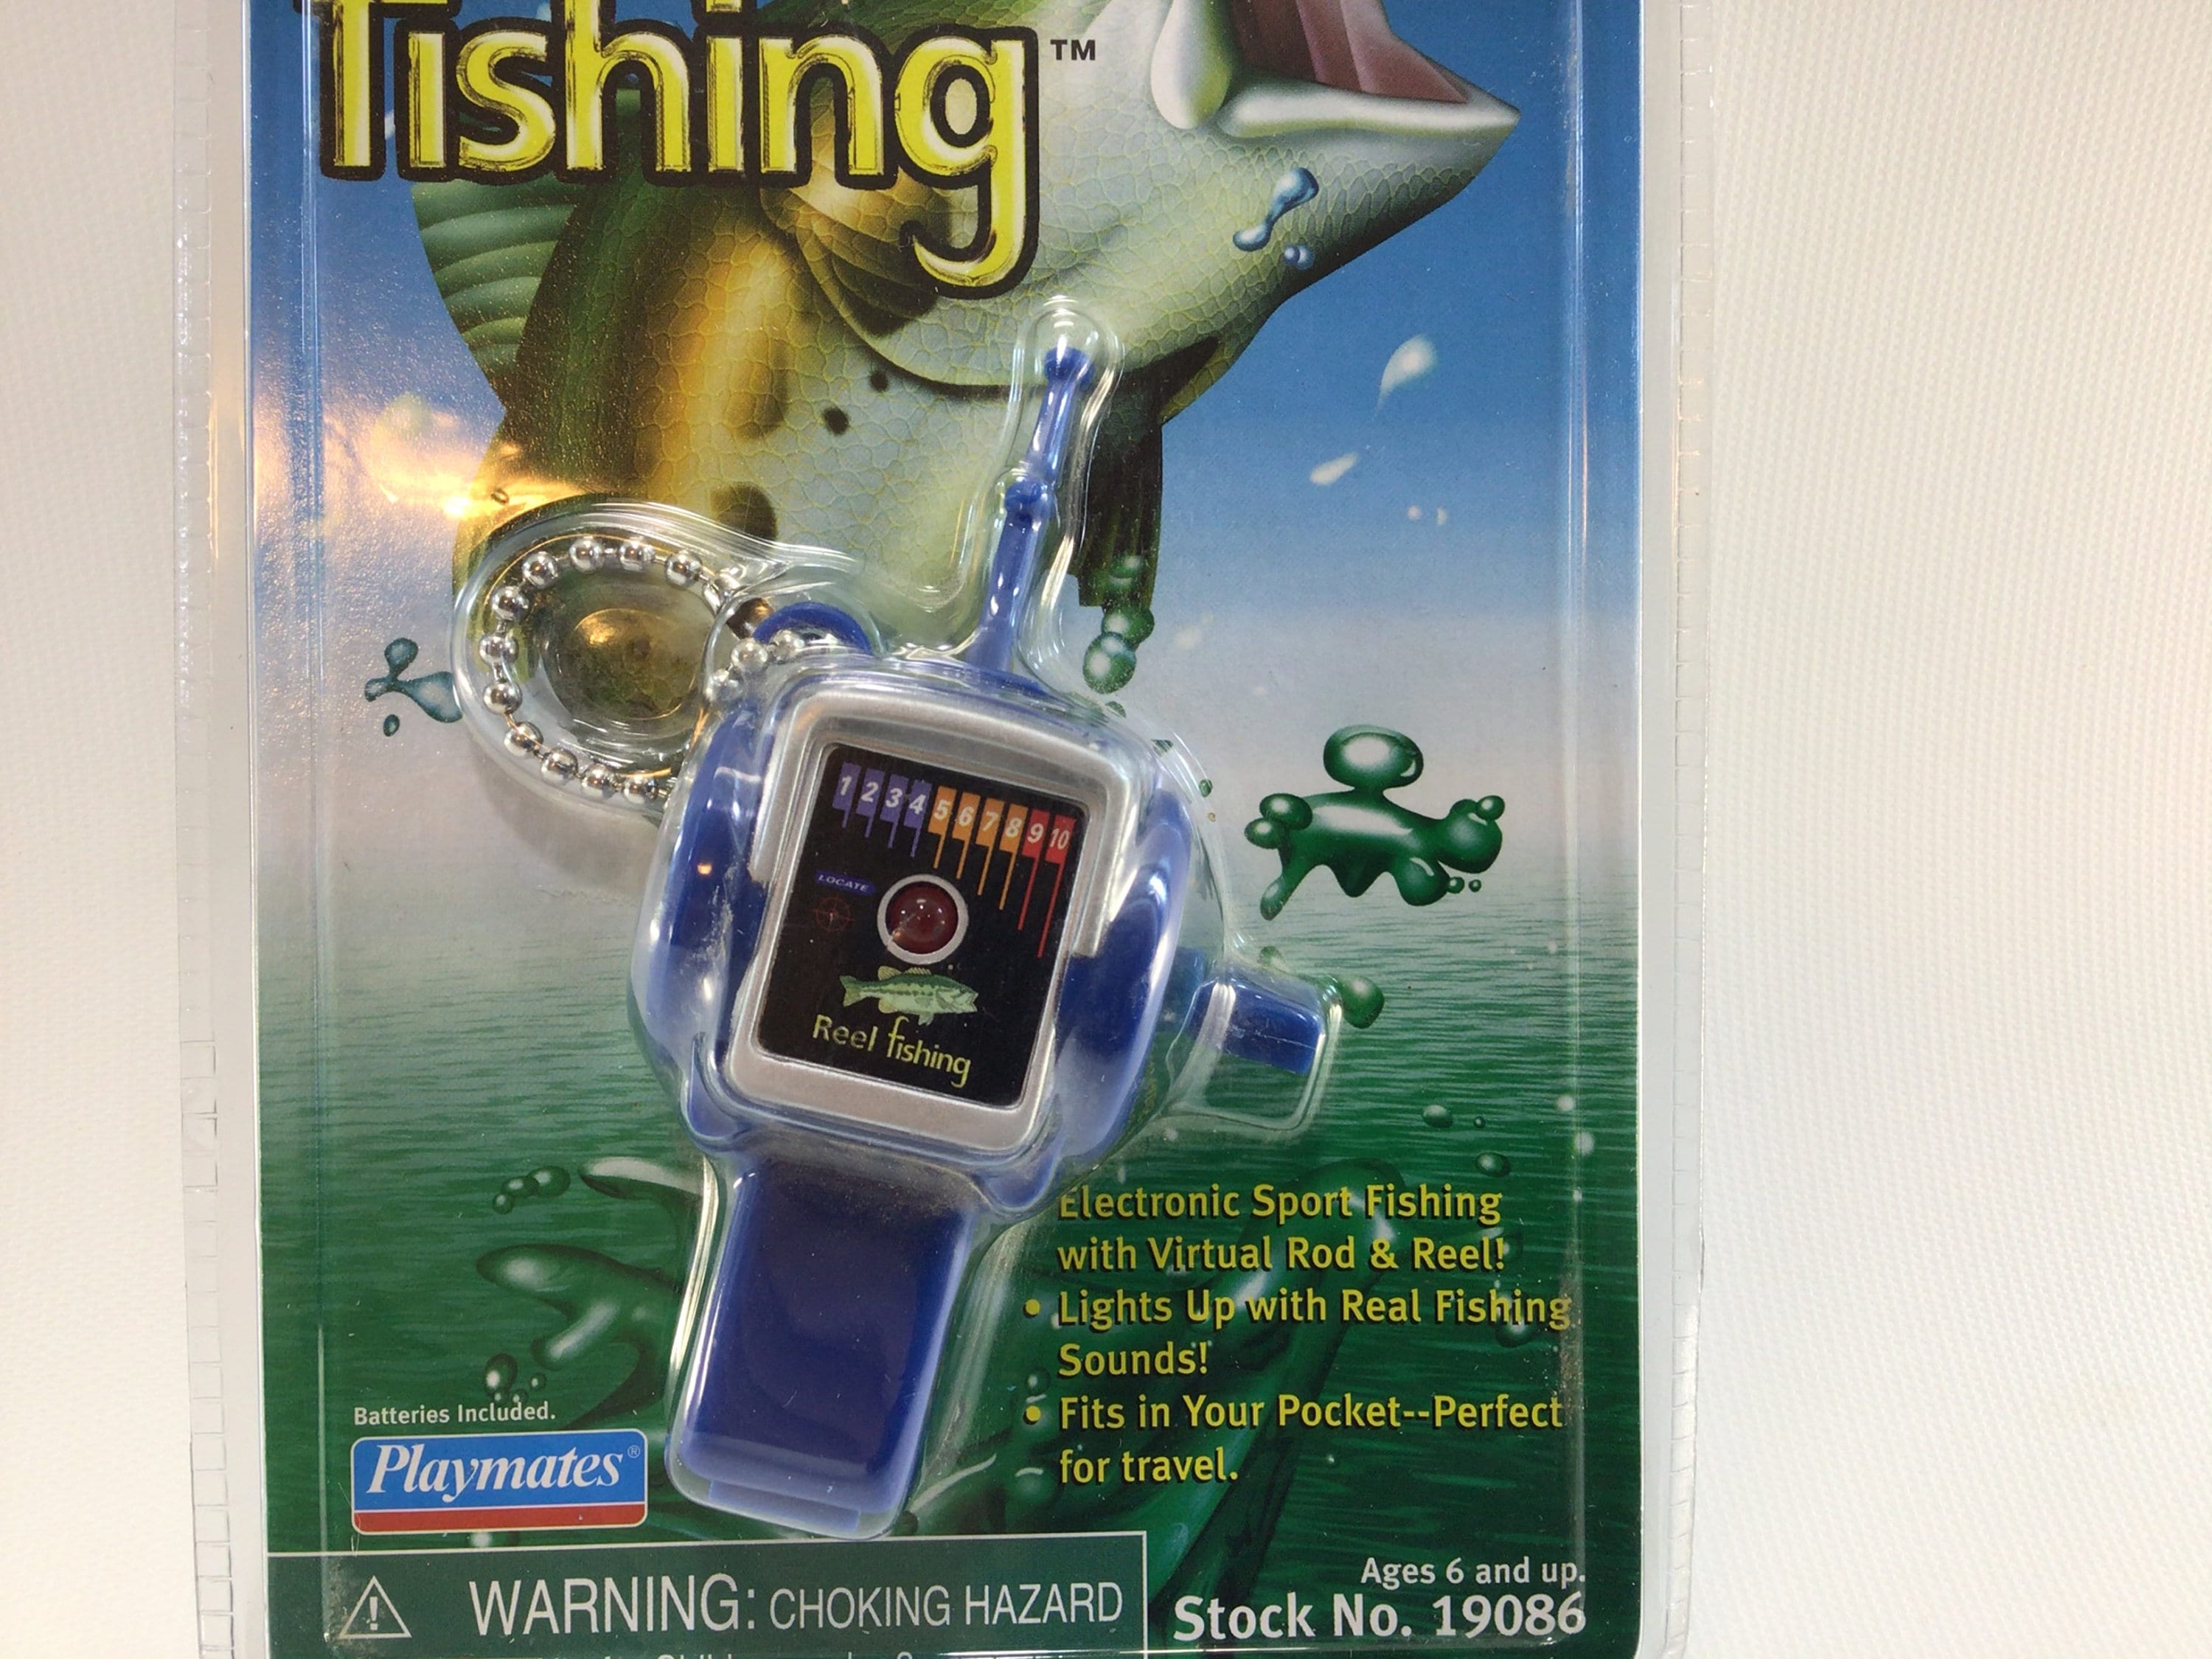 Playmates Mini Reel Fishing Keychain Electronic Game Fun Collectible Toy -   Canada